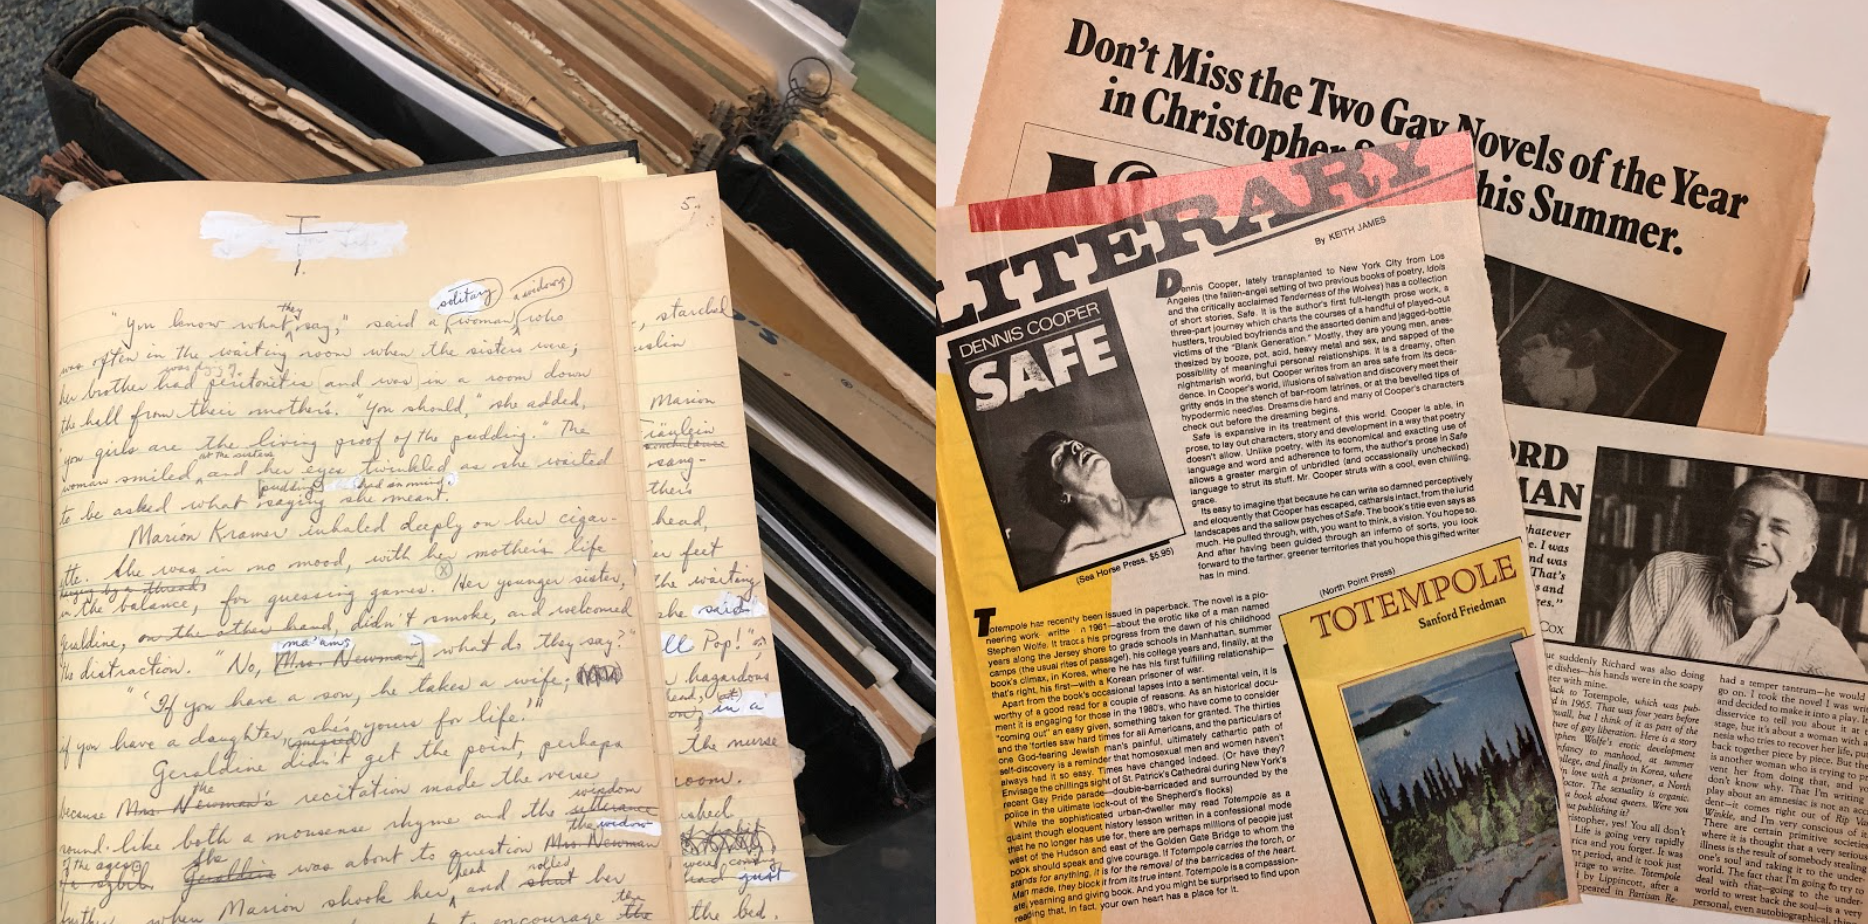 Left: Manuscript. Right: Press clippings featuring reviews of “Totempole”.